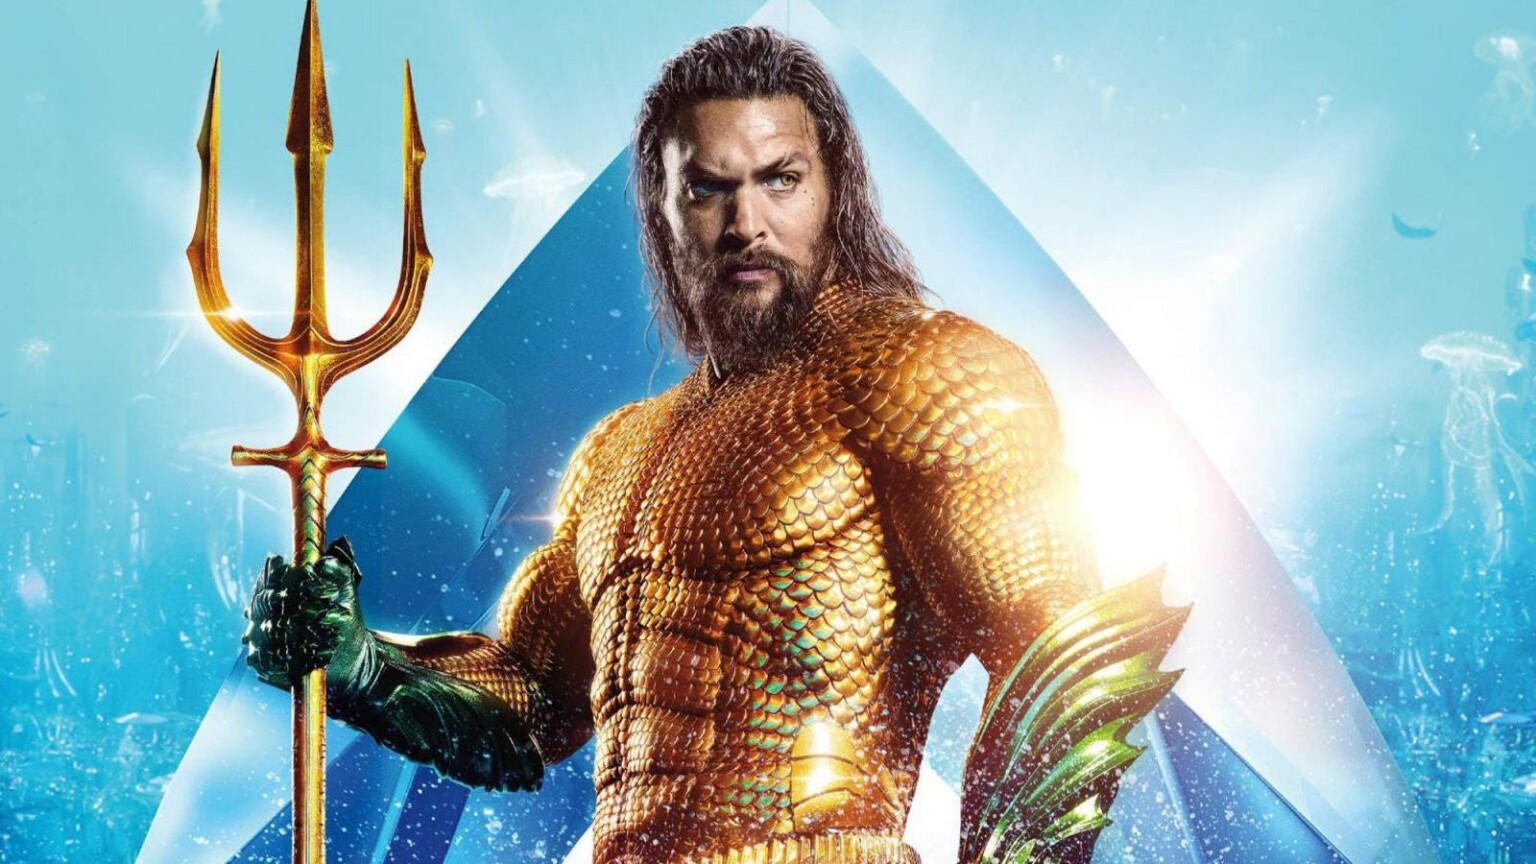 download the new version for windows Aquaman